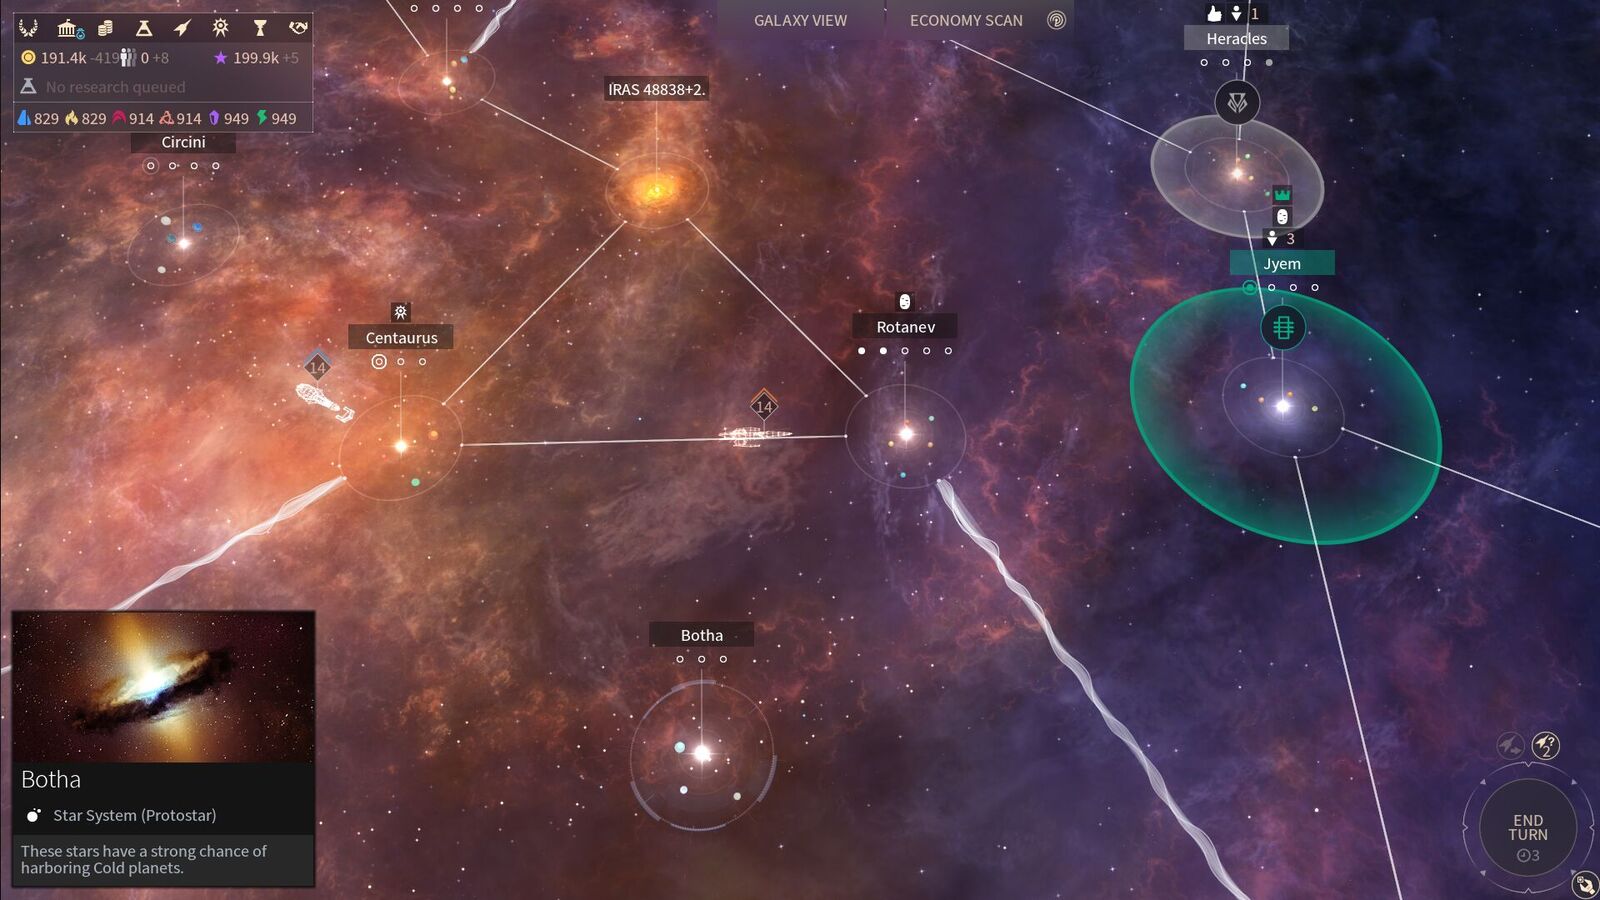 Endless space 2 - constellation view